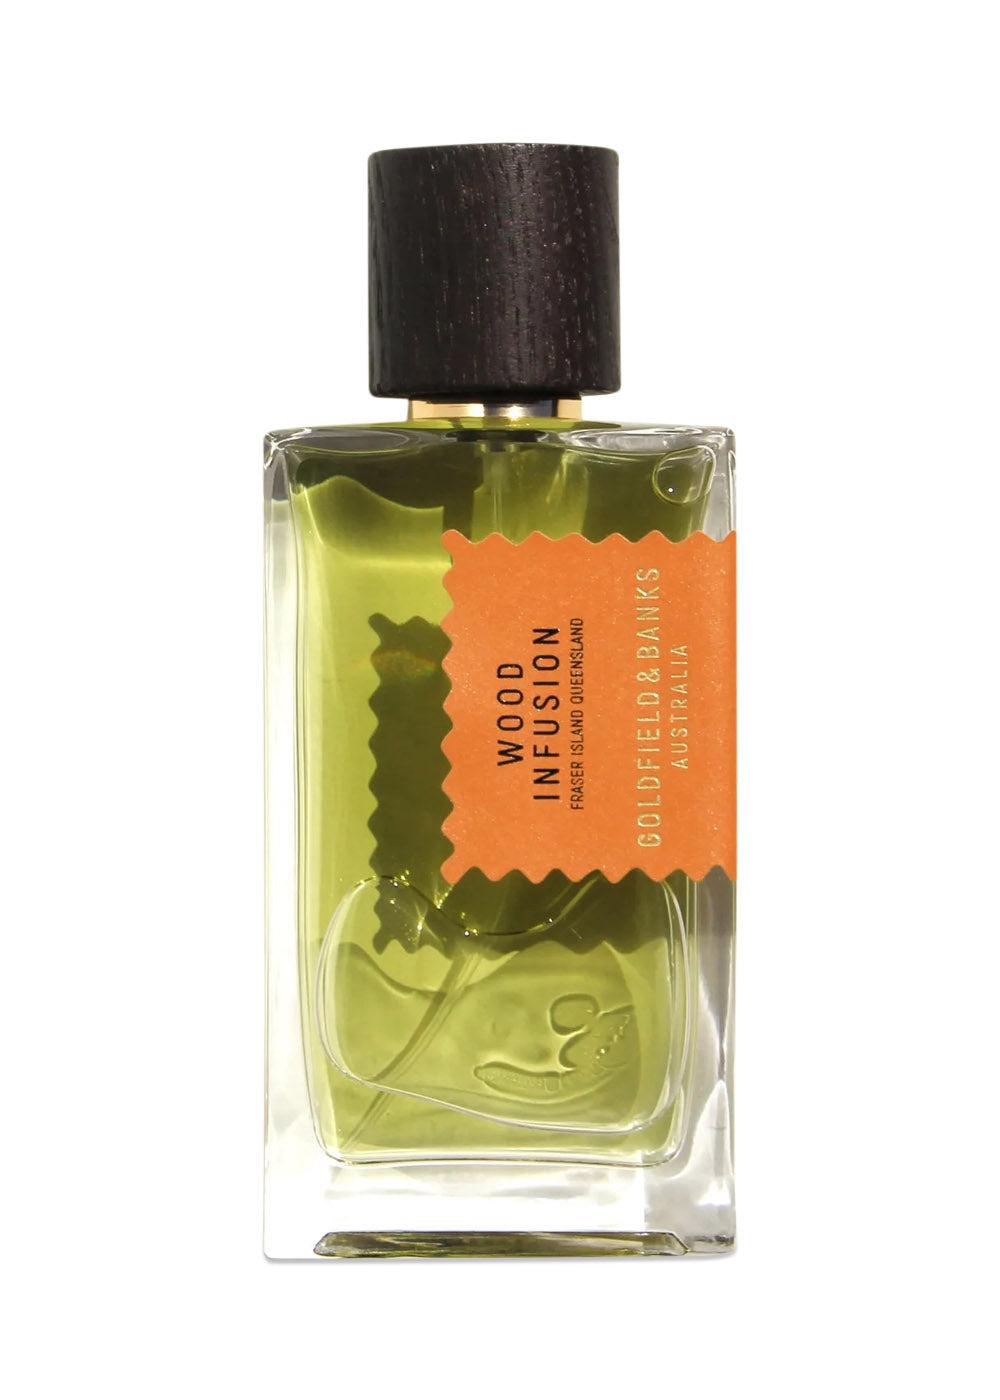 Goldfield & Banks' Wood Infusion - 100 Ml. Køb beauty her.